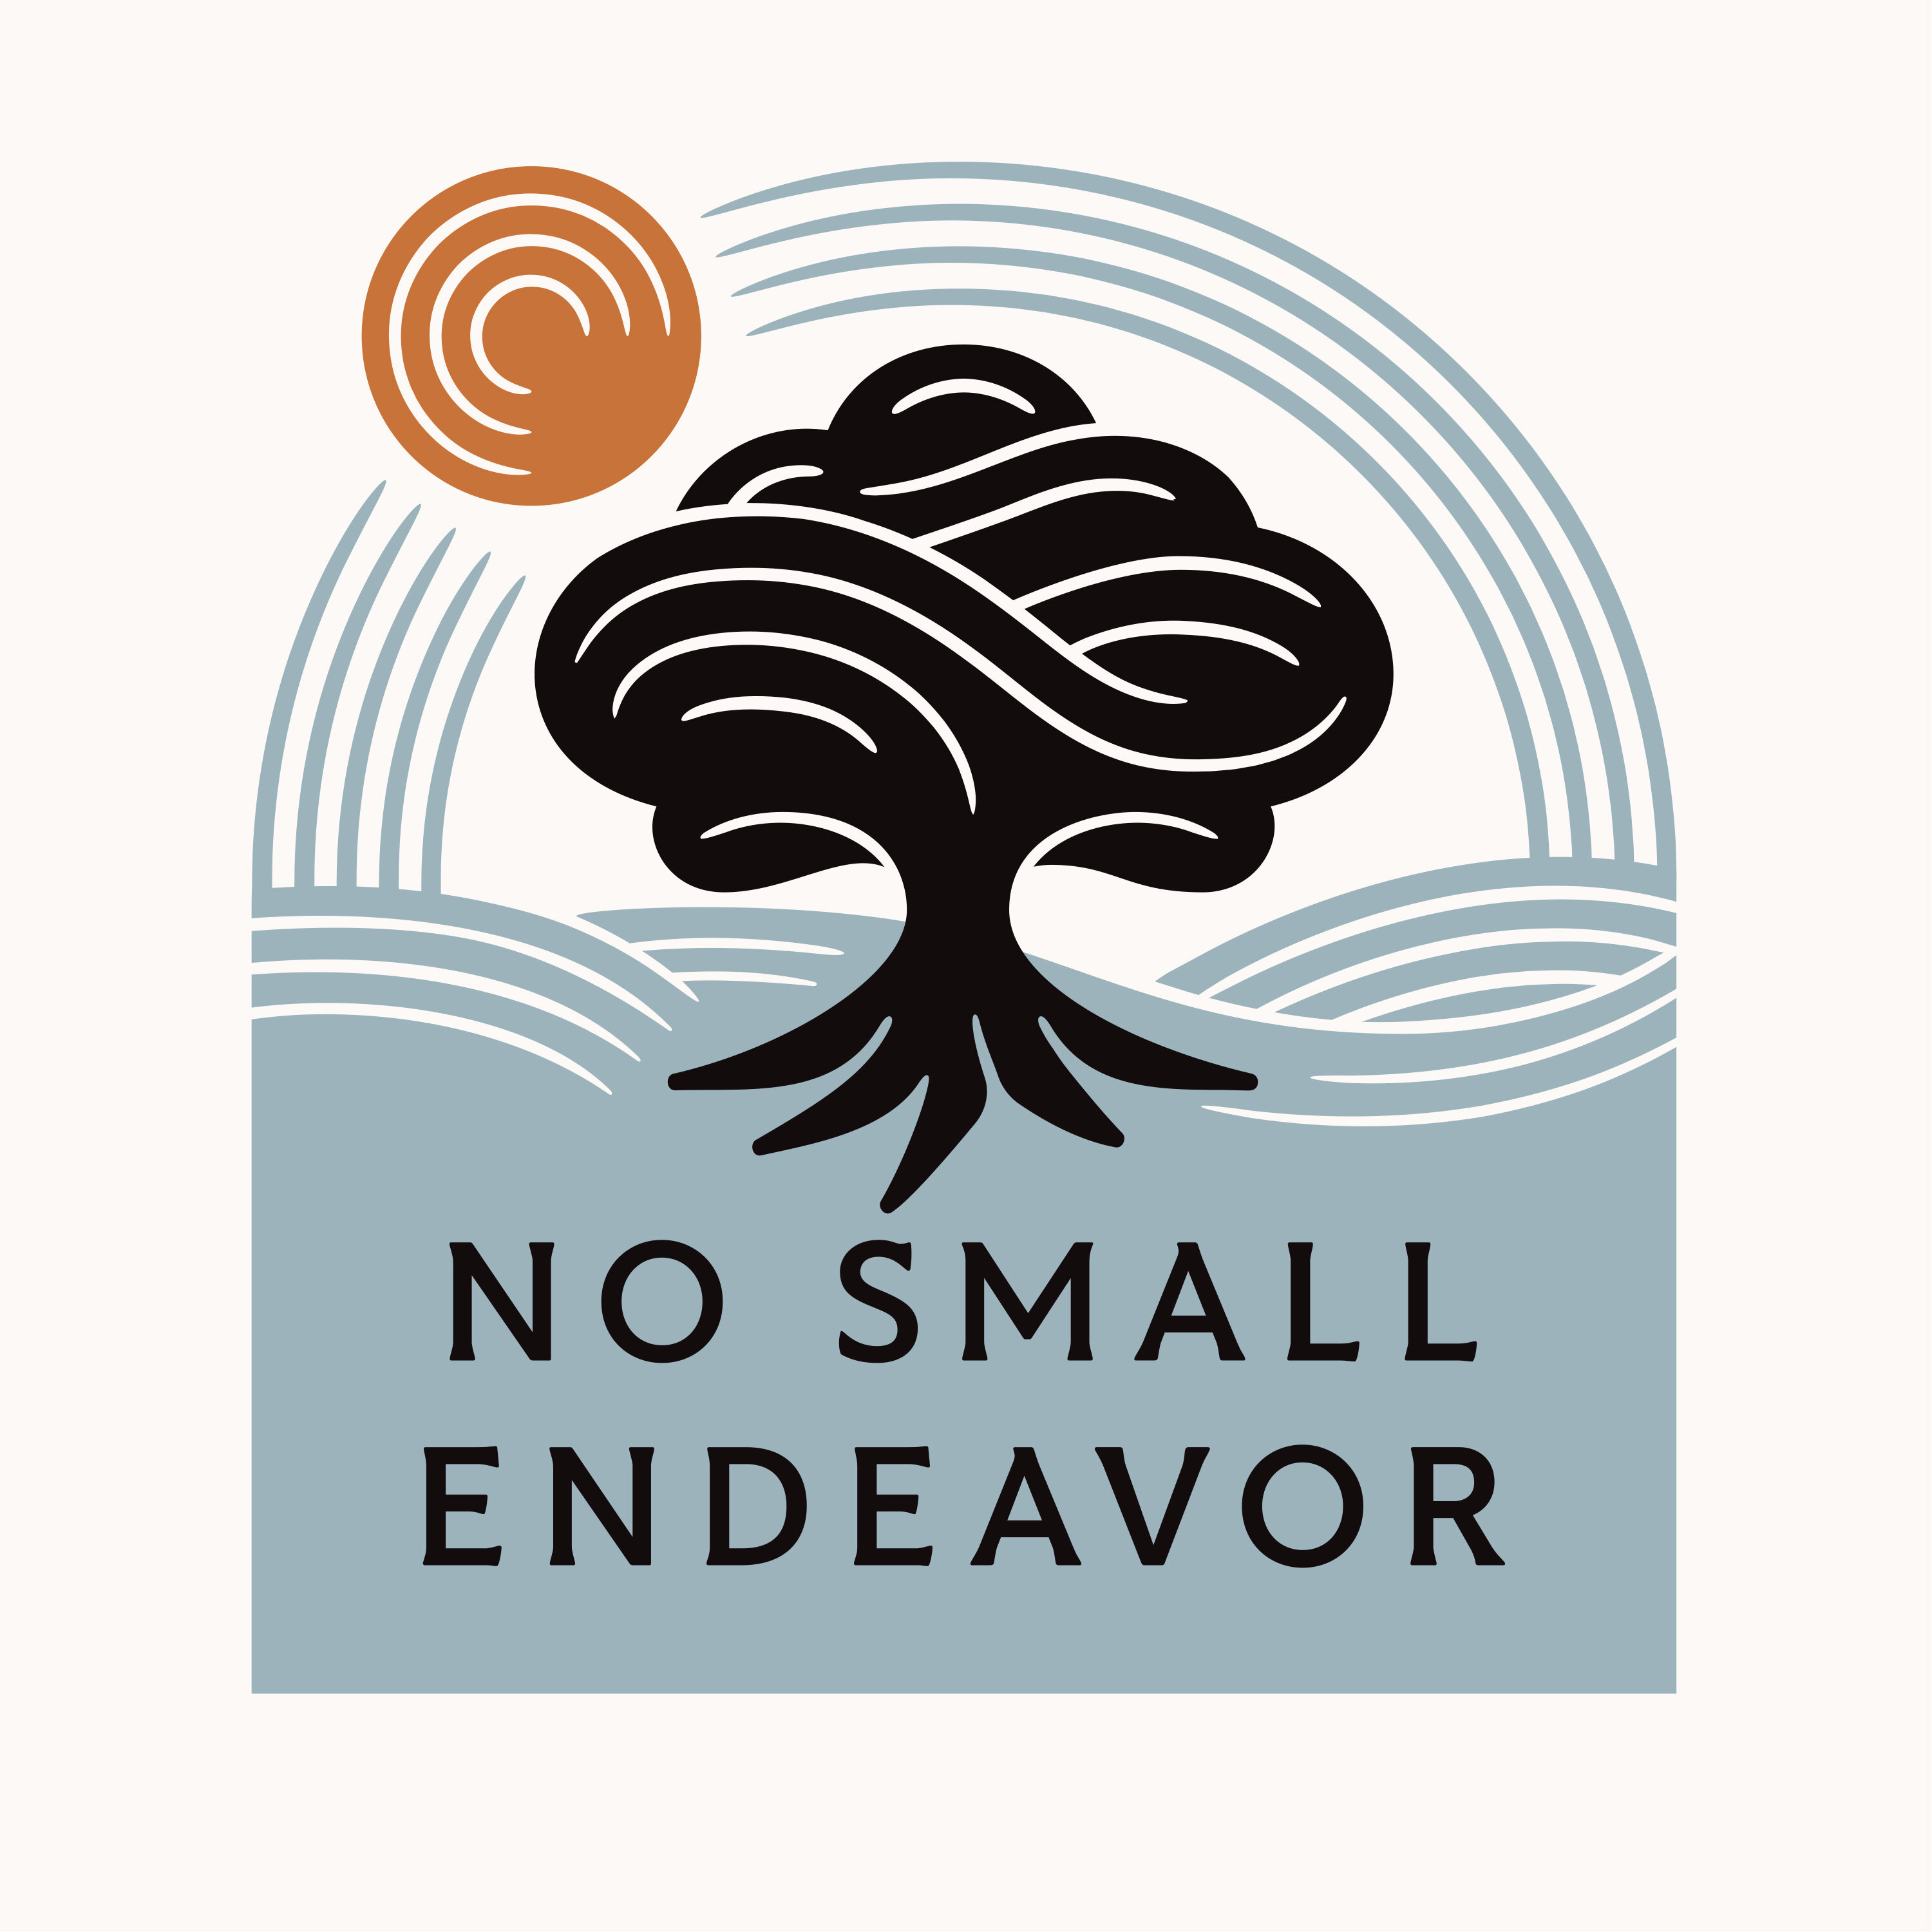 Thumbnail for "85: The New Name: Why Living a Good Life is “No Small Endeavor”".